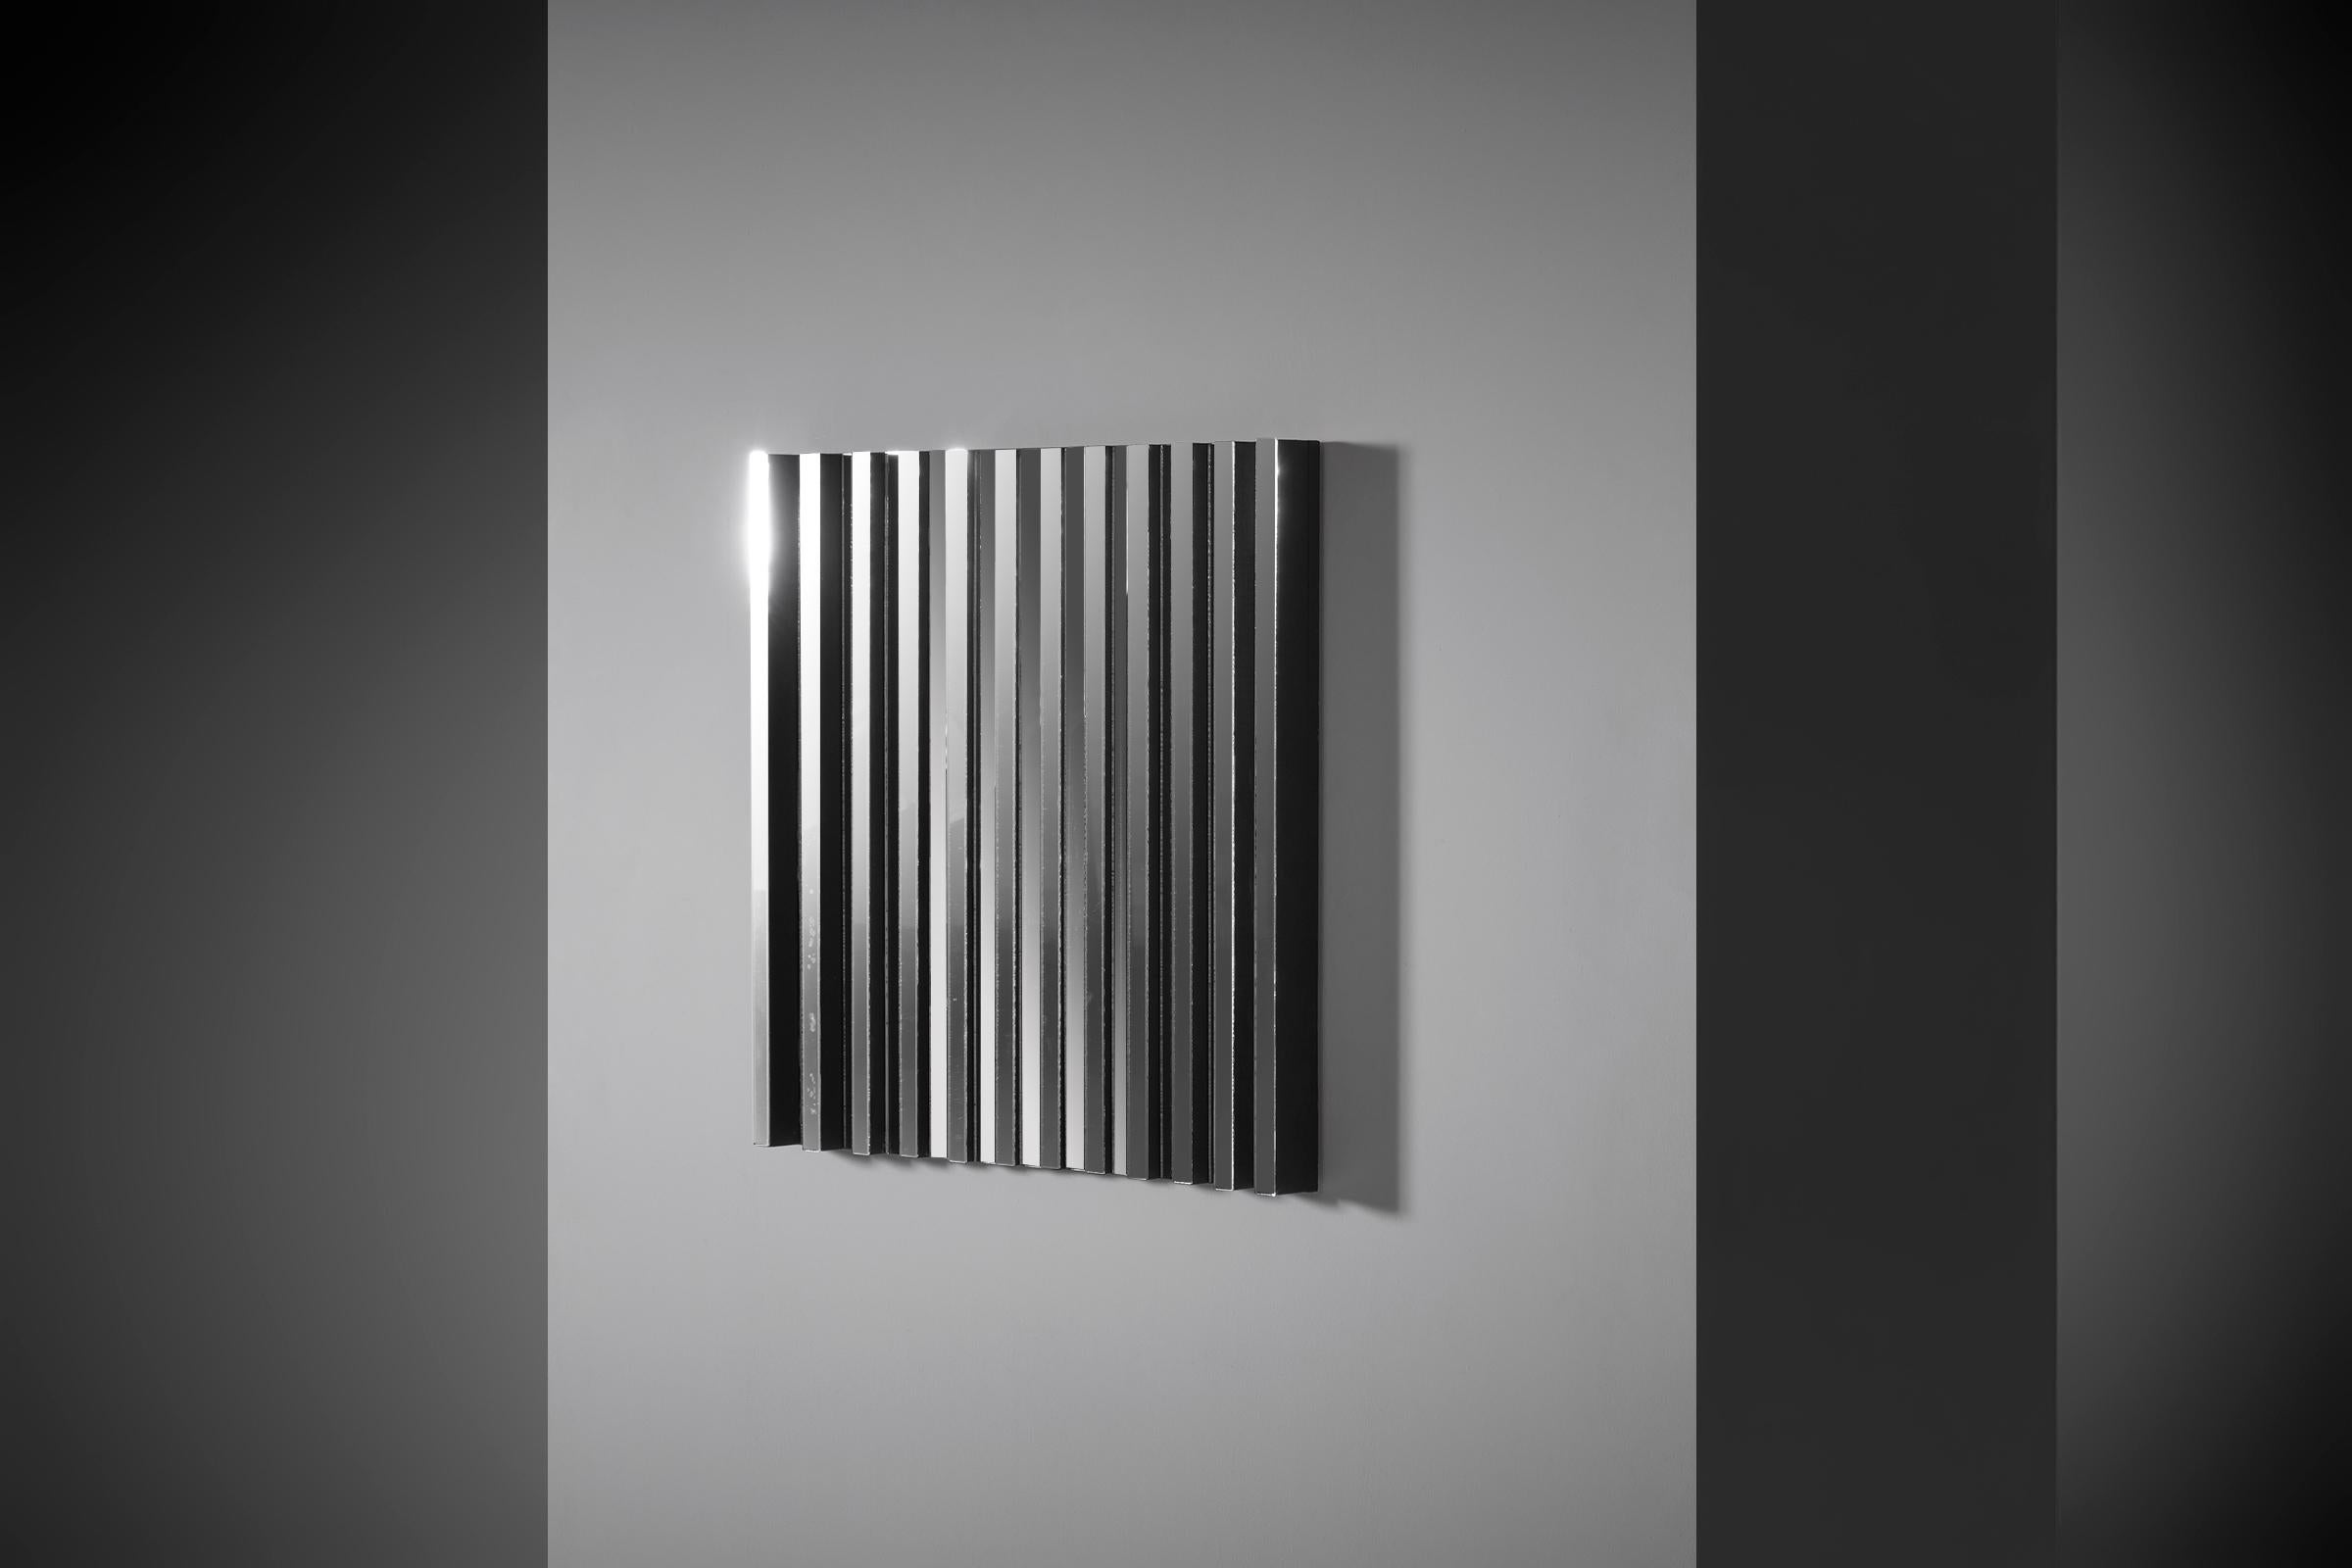 Abstract Kinetic Mirror Artwork by Godfried Lonis, 1977 For Sale 1